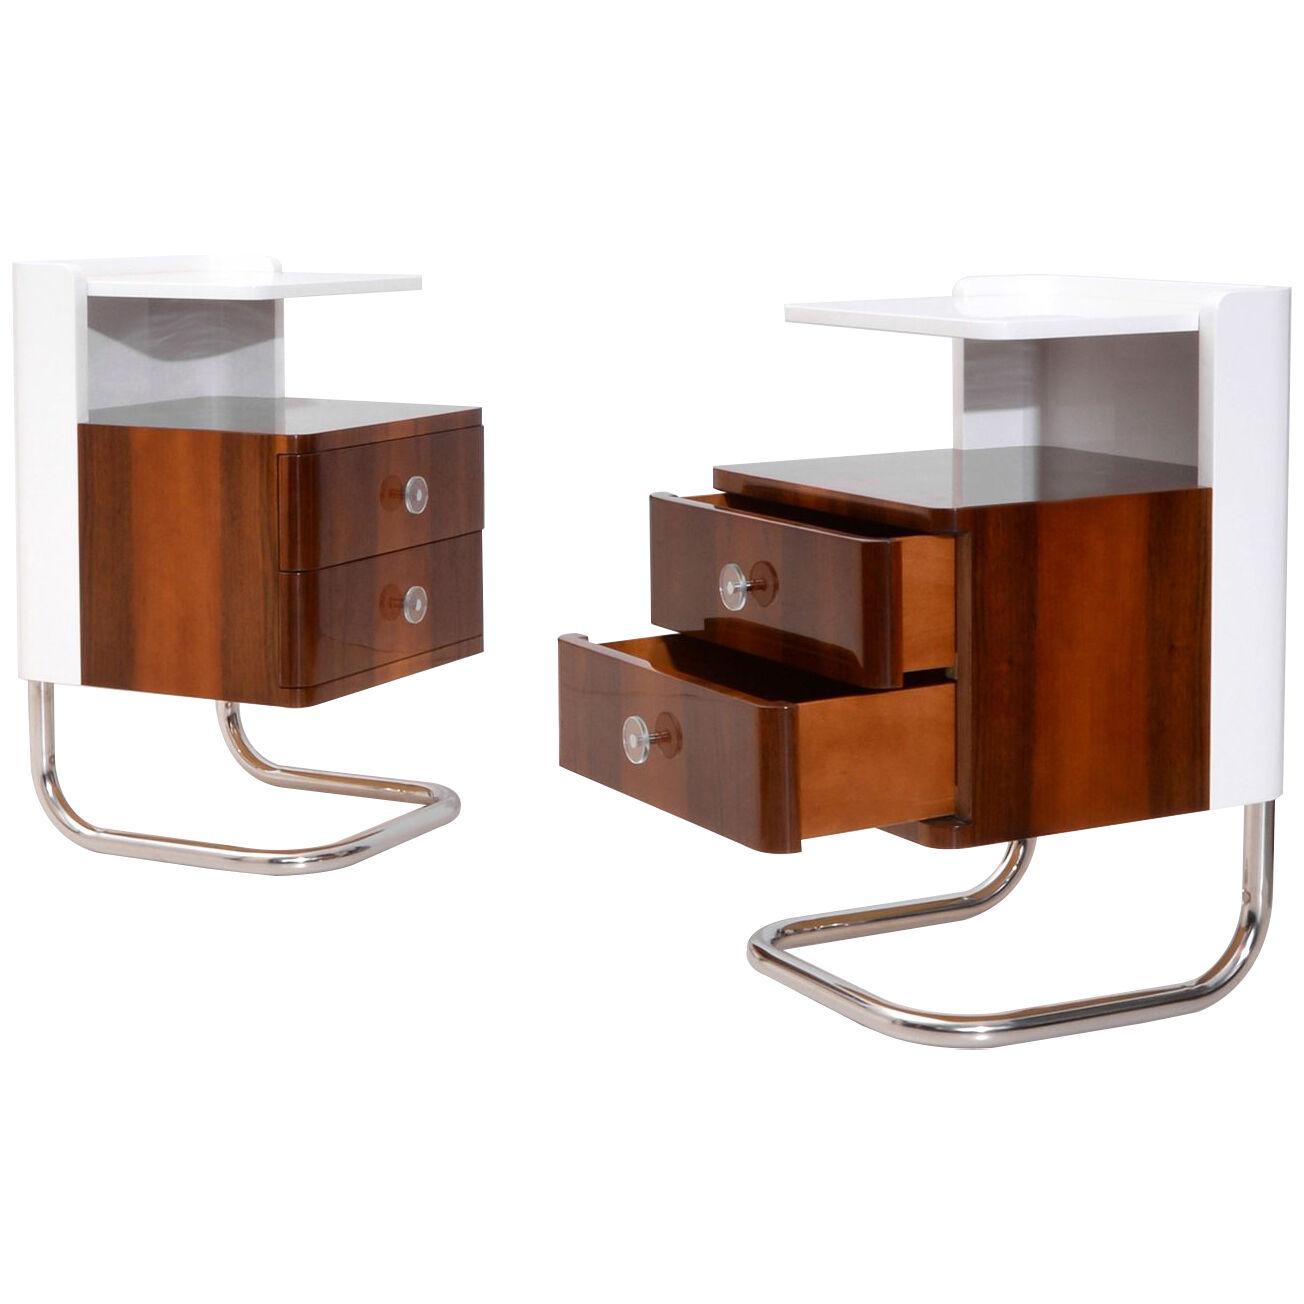 Modern contemporary customizable bedside tables, high gloss lacquered wood